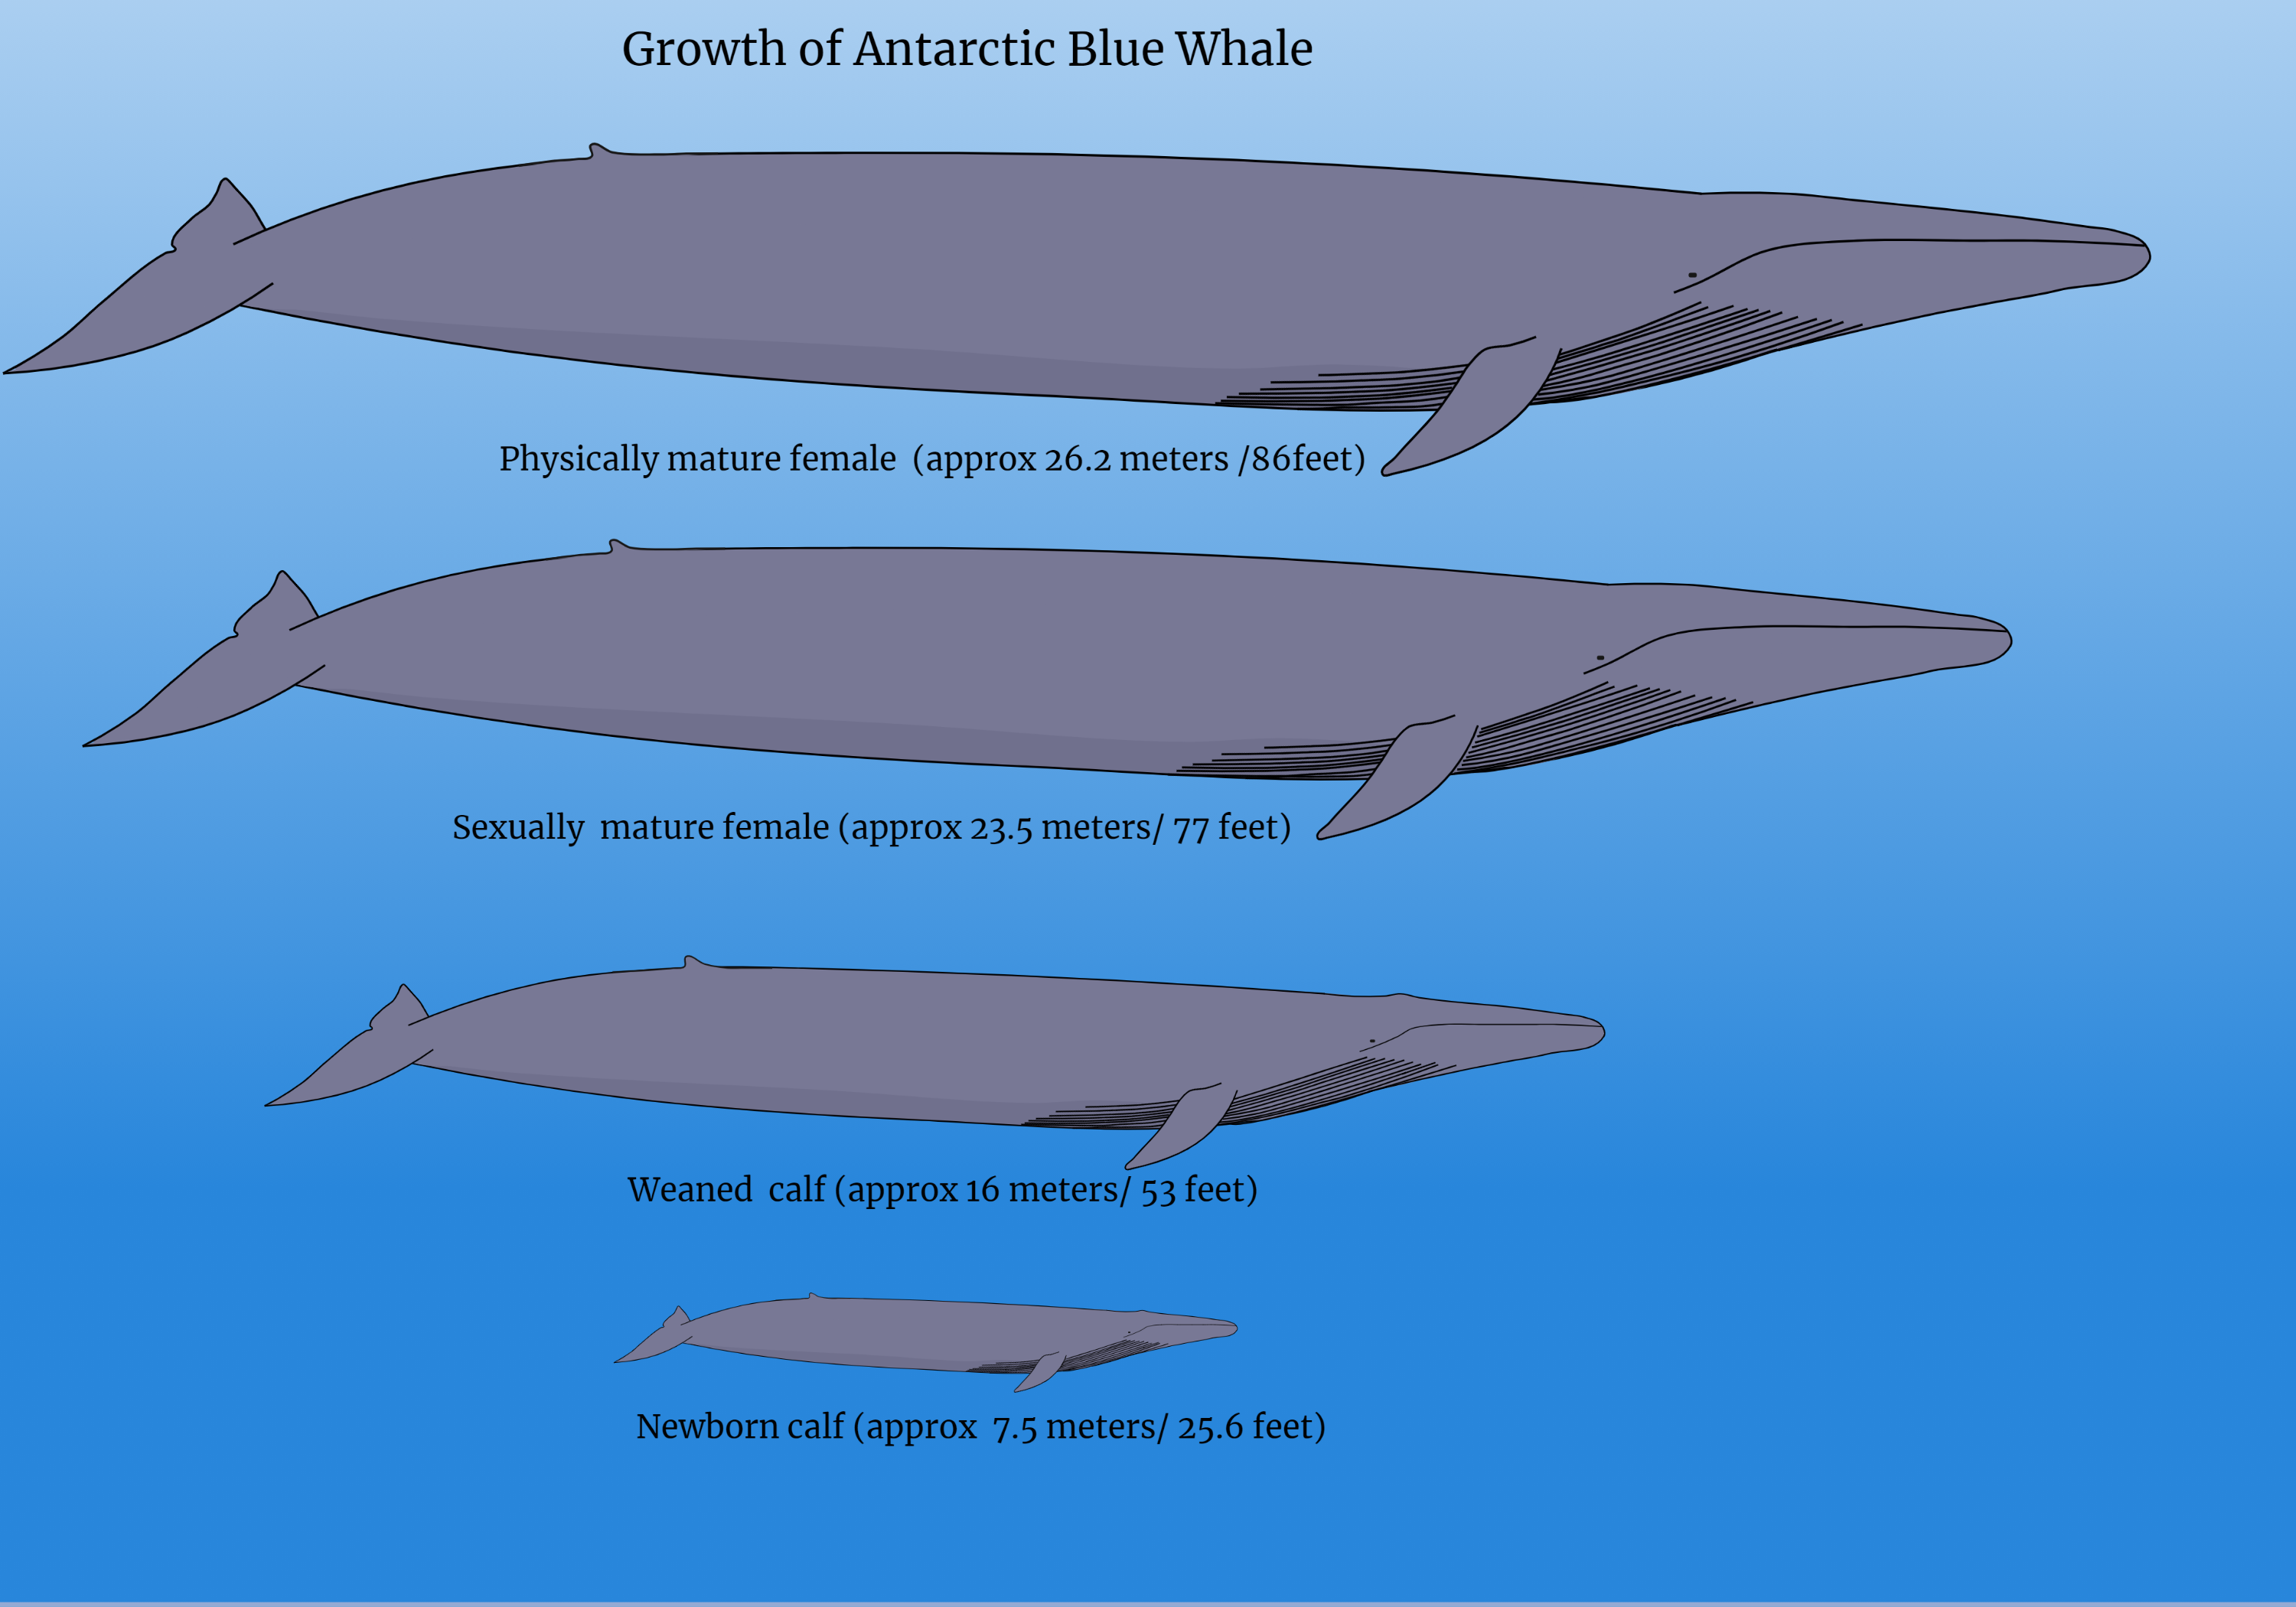 Blue whale life history graphic